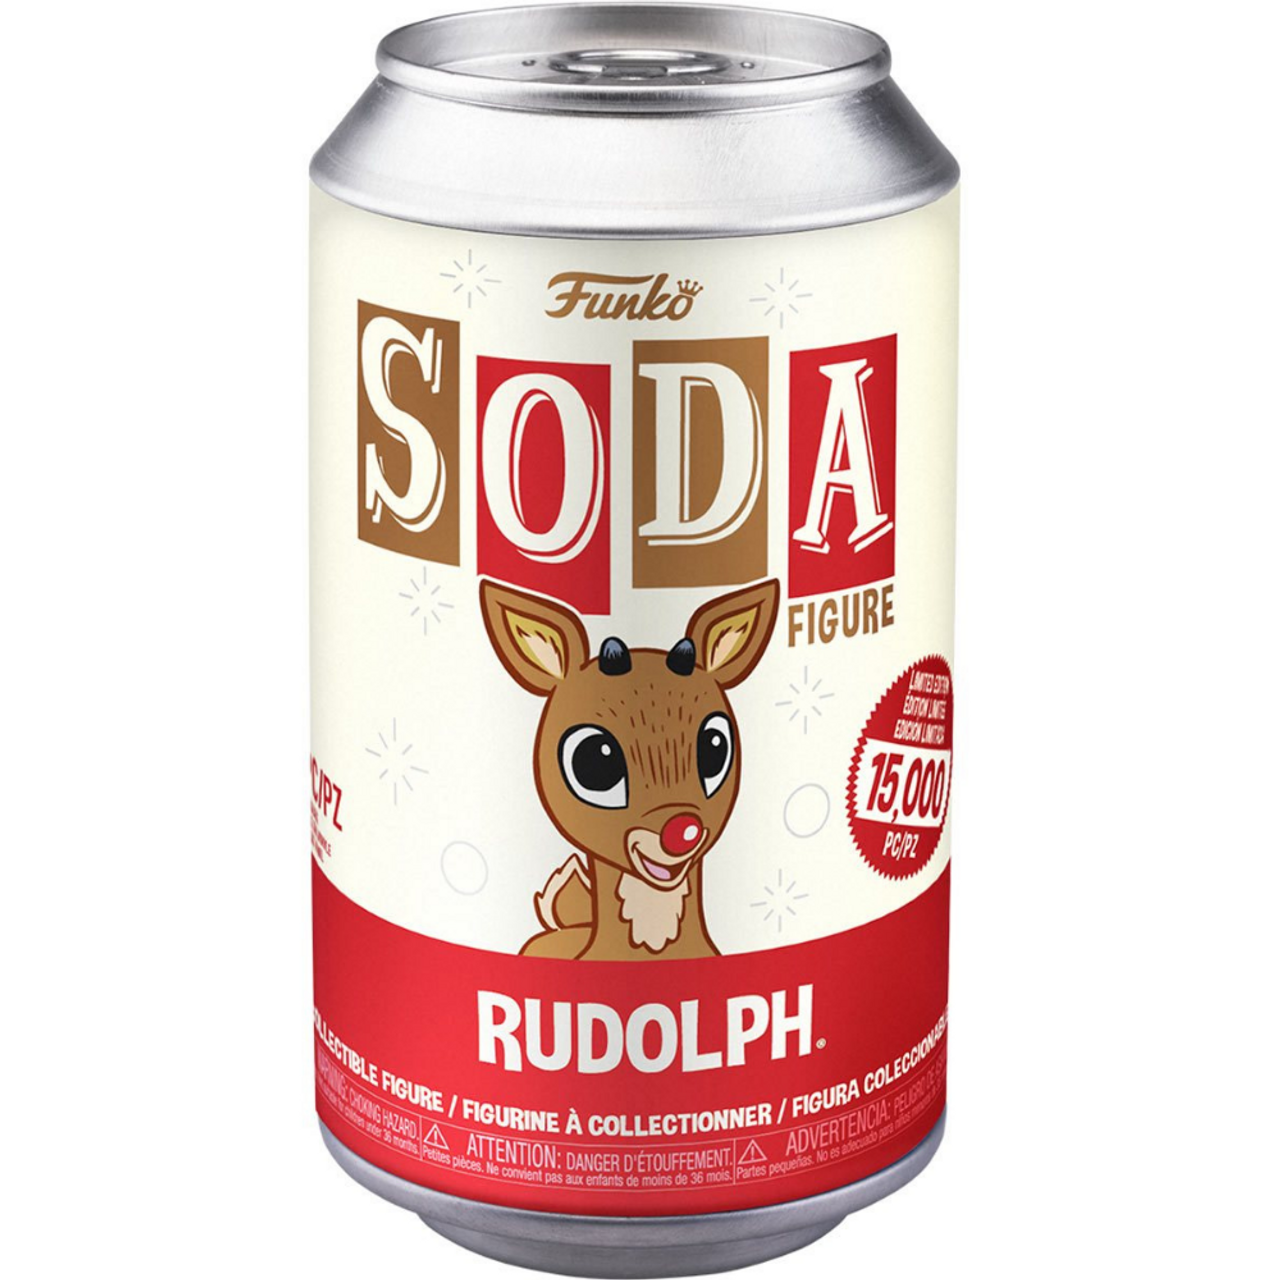 Funko SODA: Rudolph the Red-Nosed Reindeer